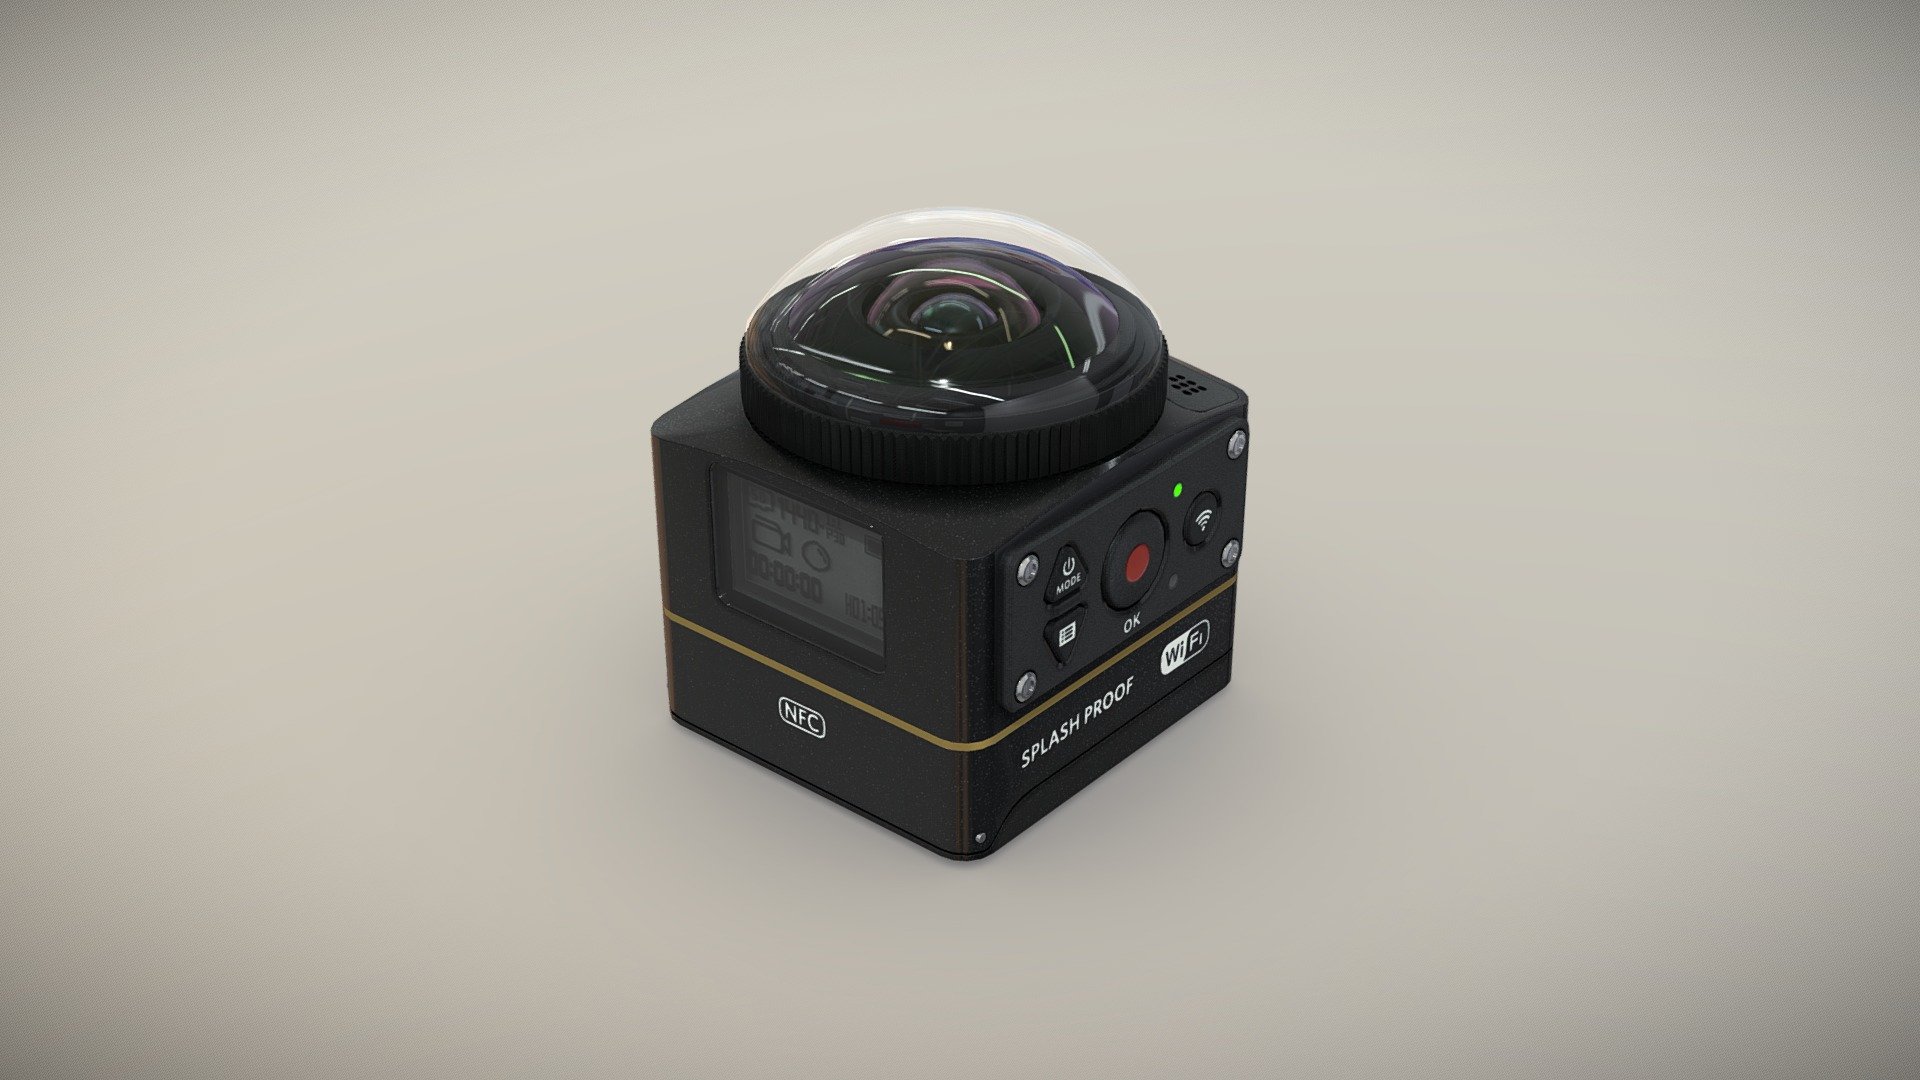 •   Let me present to you high-quality low-poly 3D model Kodak Pixpro SP360 4K. Modeling was made with ortho-photos of real action camera that is why all details of design are recreated most authentically.

•    This model consists of a two meshes, it is low-polygonal and it has four materials (for Body and Glass of Lens).

•   The total of the main textures is 5. Resolution of all textures is 4096 pixels square aspect ratio in .png format. Also there is original texture file .PSD format in separate archive.

•   Polygon count of the model is – 7306.

•   The model has correct dimensions in real-world scale. All parts grouped and named correctly.

•   To use the model in other 3D programs there are scenes saved in formats .fbx, .obj, .DAE, .max (2010 version).

Note: If you see some artifacts on the textures, it means compression works in the Viewer. We recommend setting HD quality for textures. But anyway, original textures have no artifacts 3d model